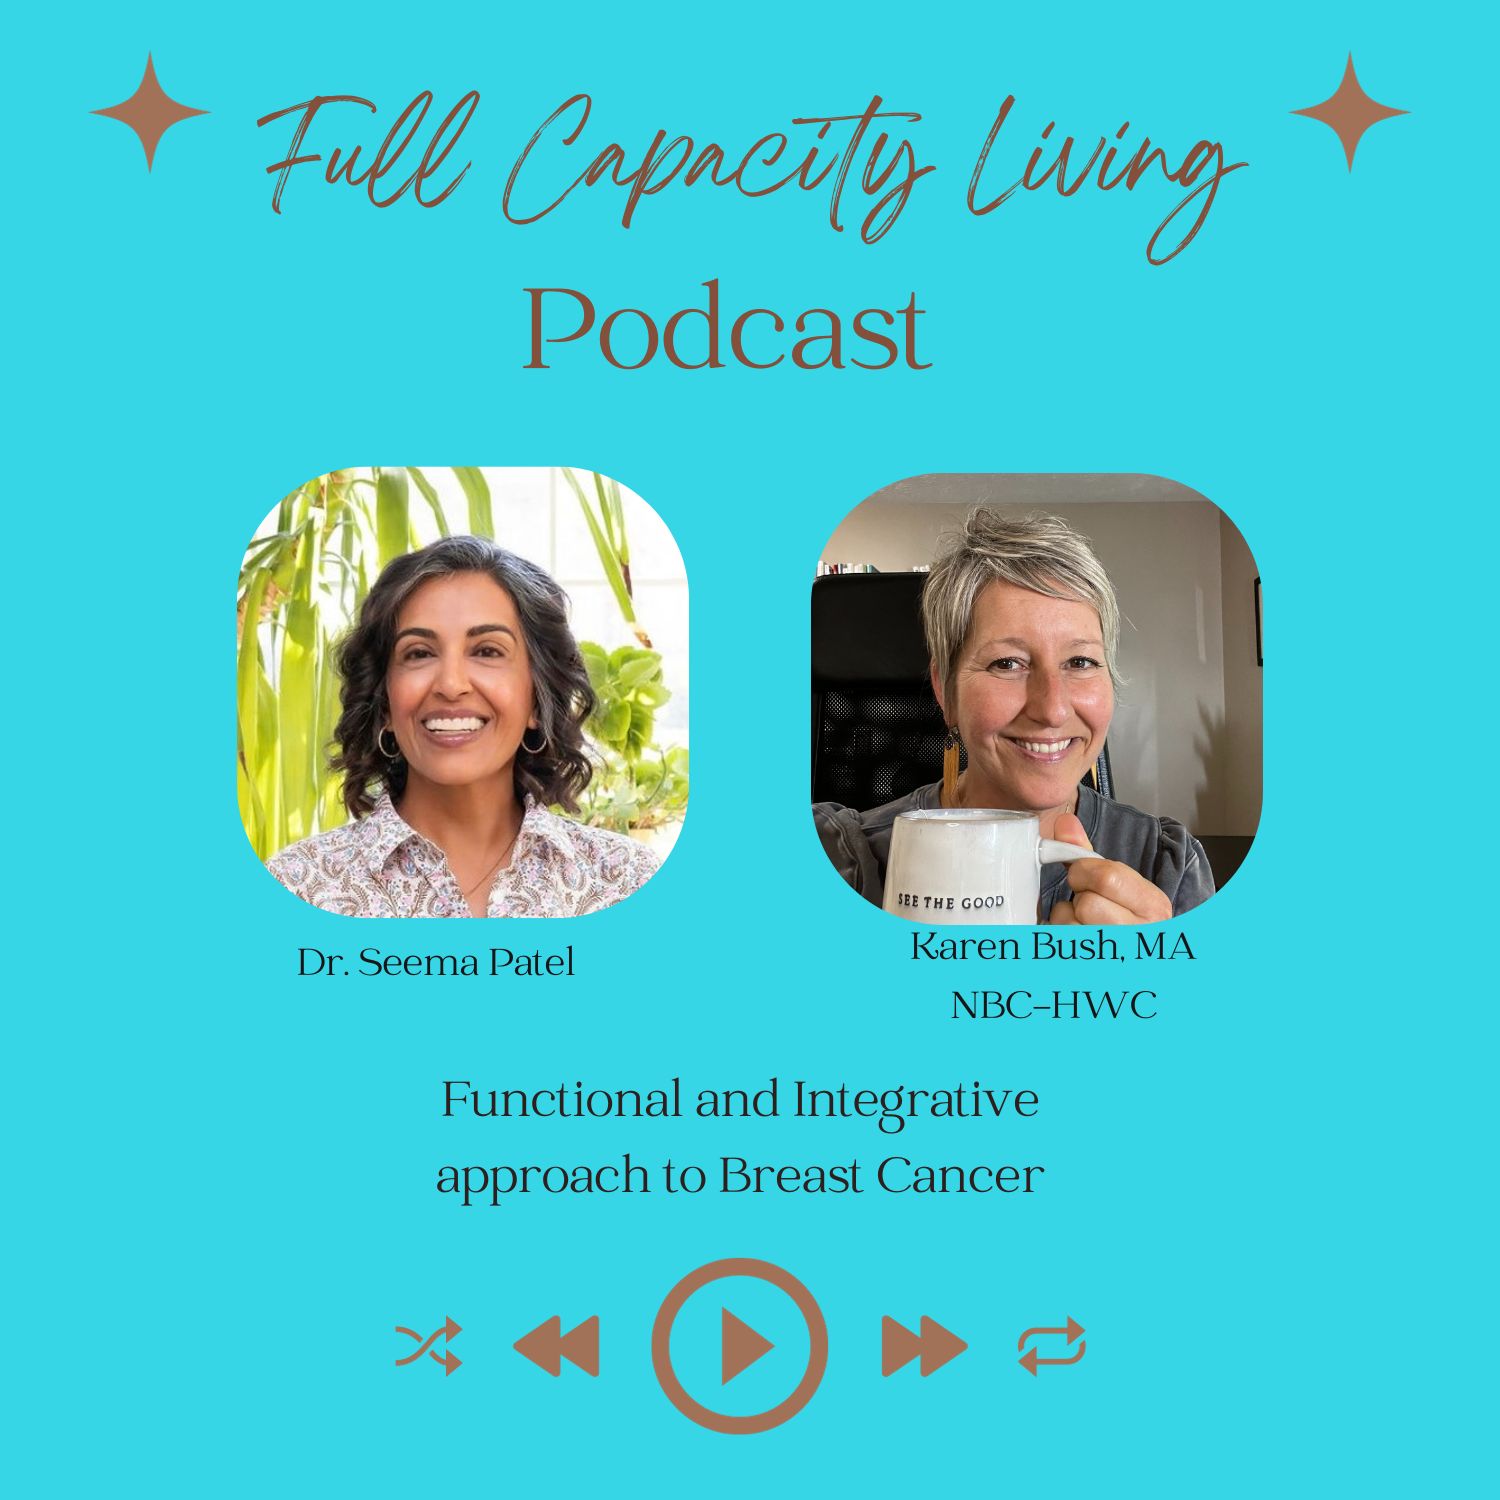 Breast Cancer: A Functional and Integrative approach with Dr. Seema Patel